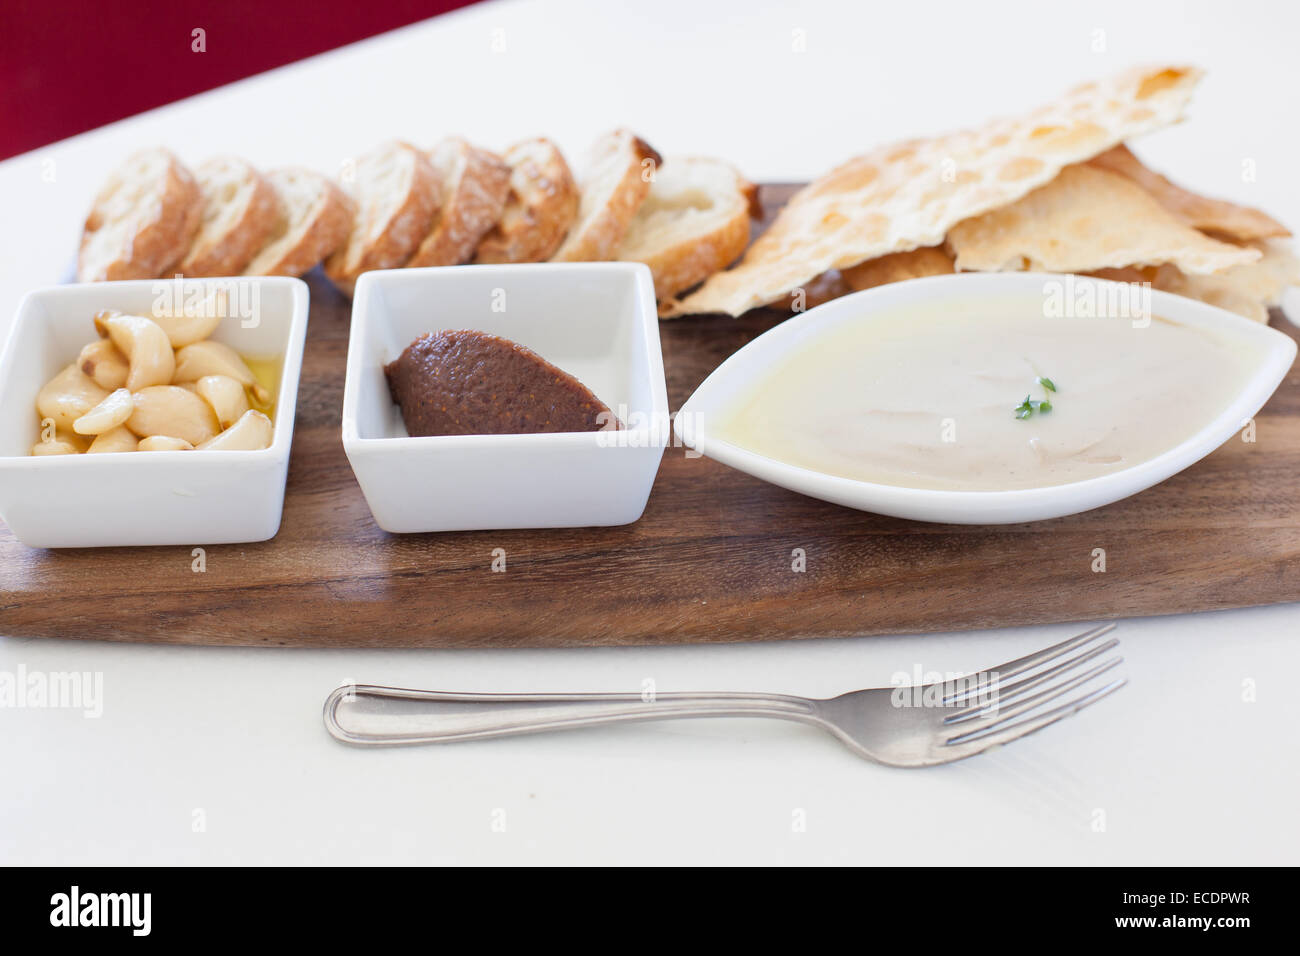 Liver pate plate with bread, fig jam, and garlic confit Stock Photo